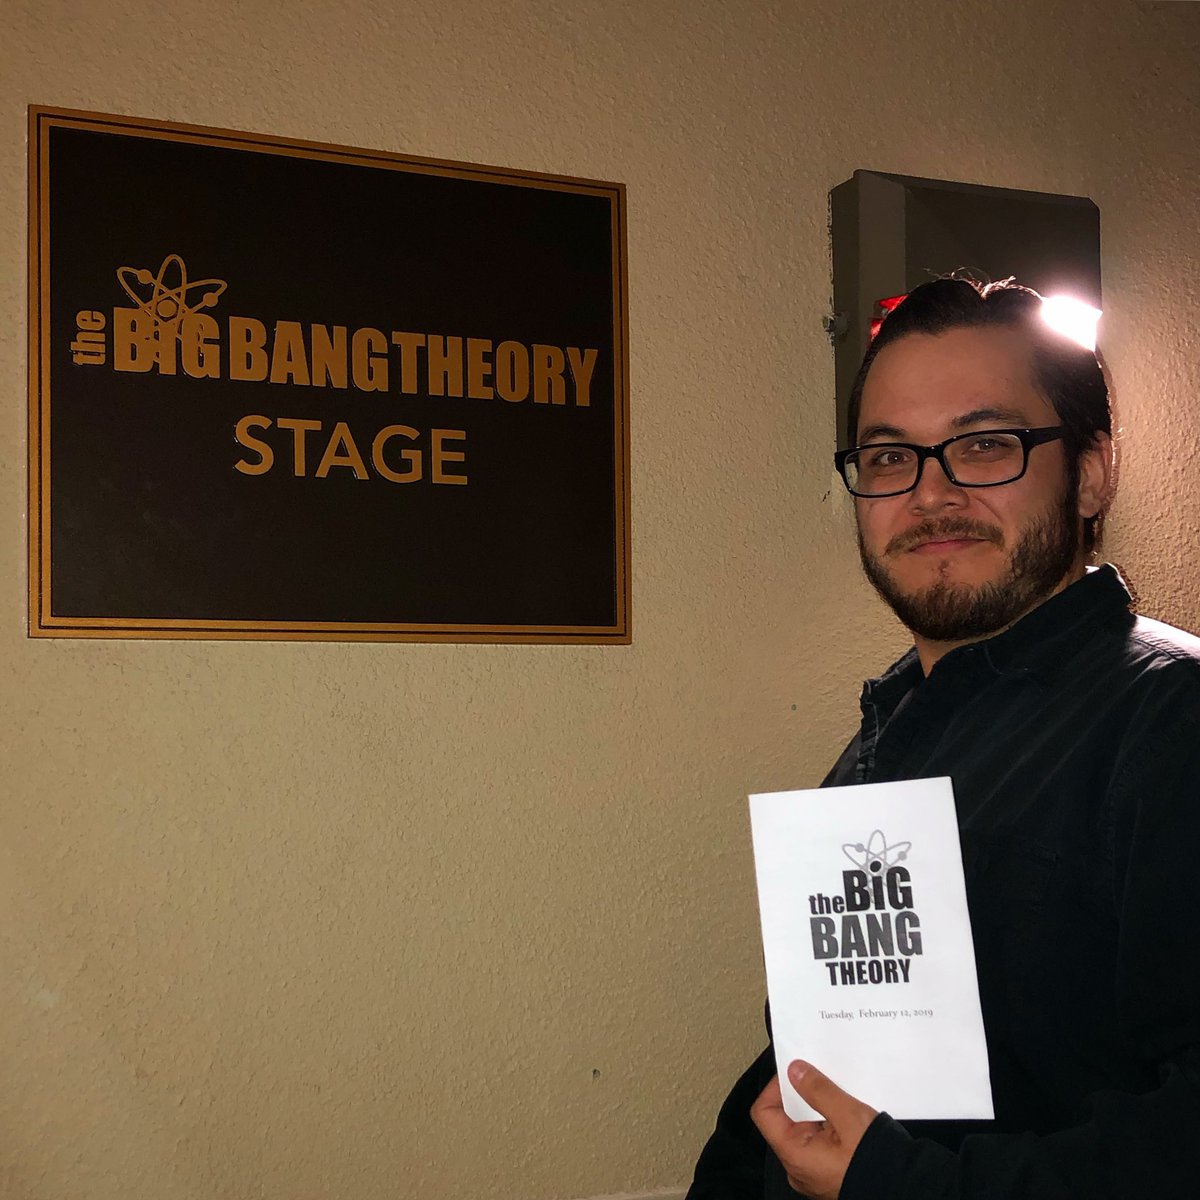 What a privilege to be on the set of The Big Bang Theory as the entire production works towards the finish line after 12 seasons!!! 😁🙌🏻❤️🙉📺📽😂
#TheBigBangTheory #BigBangTheoryStage #Stage25 #WarnerBrosTelevision #CBS #EmbraceYourInnerNerd